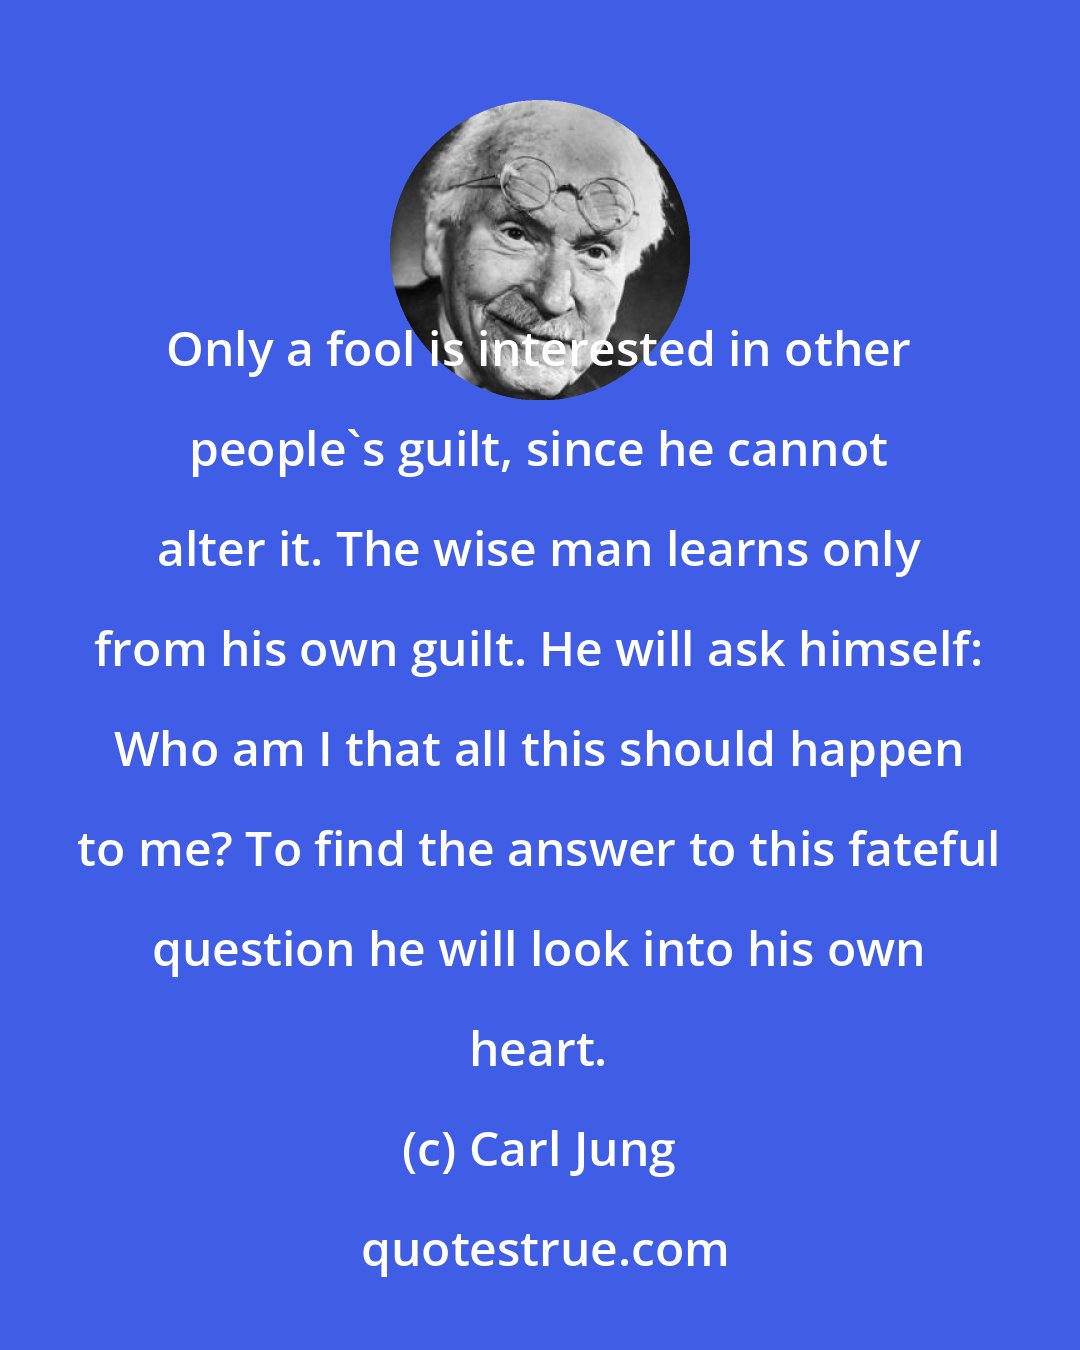 Carl Jung: Only a fool is interested in other people's guilt, since he cannot alter it. The wise man learns only from his own guilt. He will ask himself: Who am I that all this should happen to me? To find the answer to this fateful question he will look into his own heart.